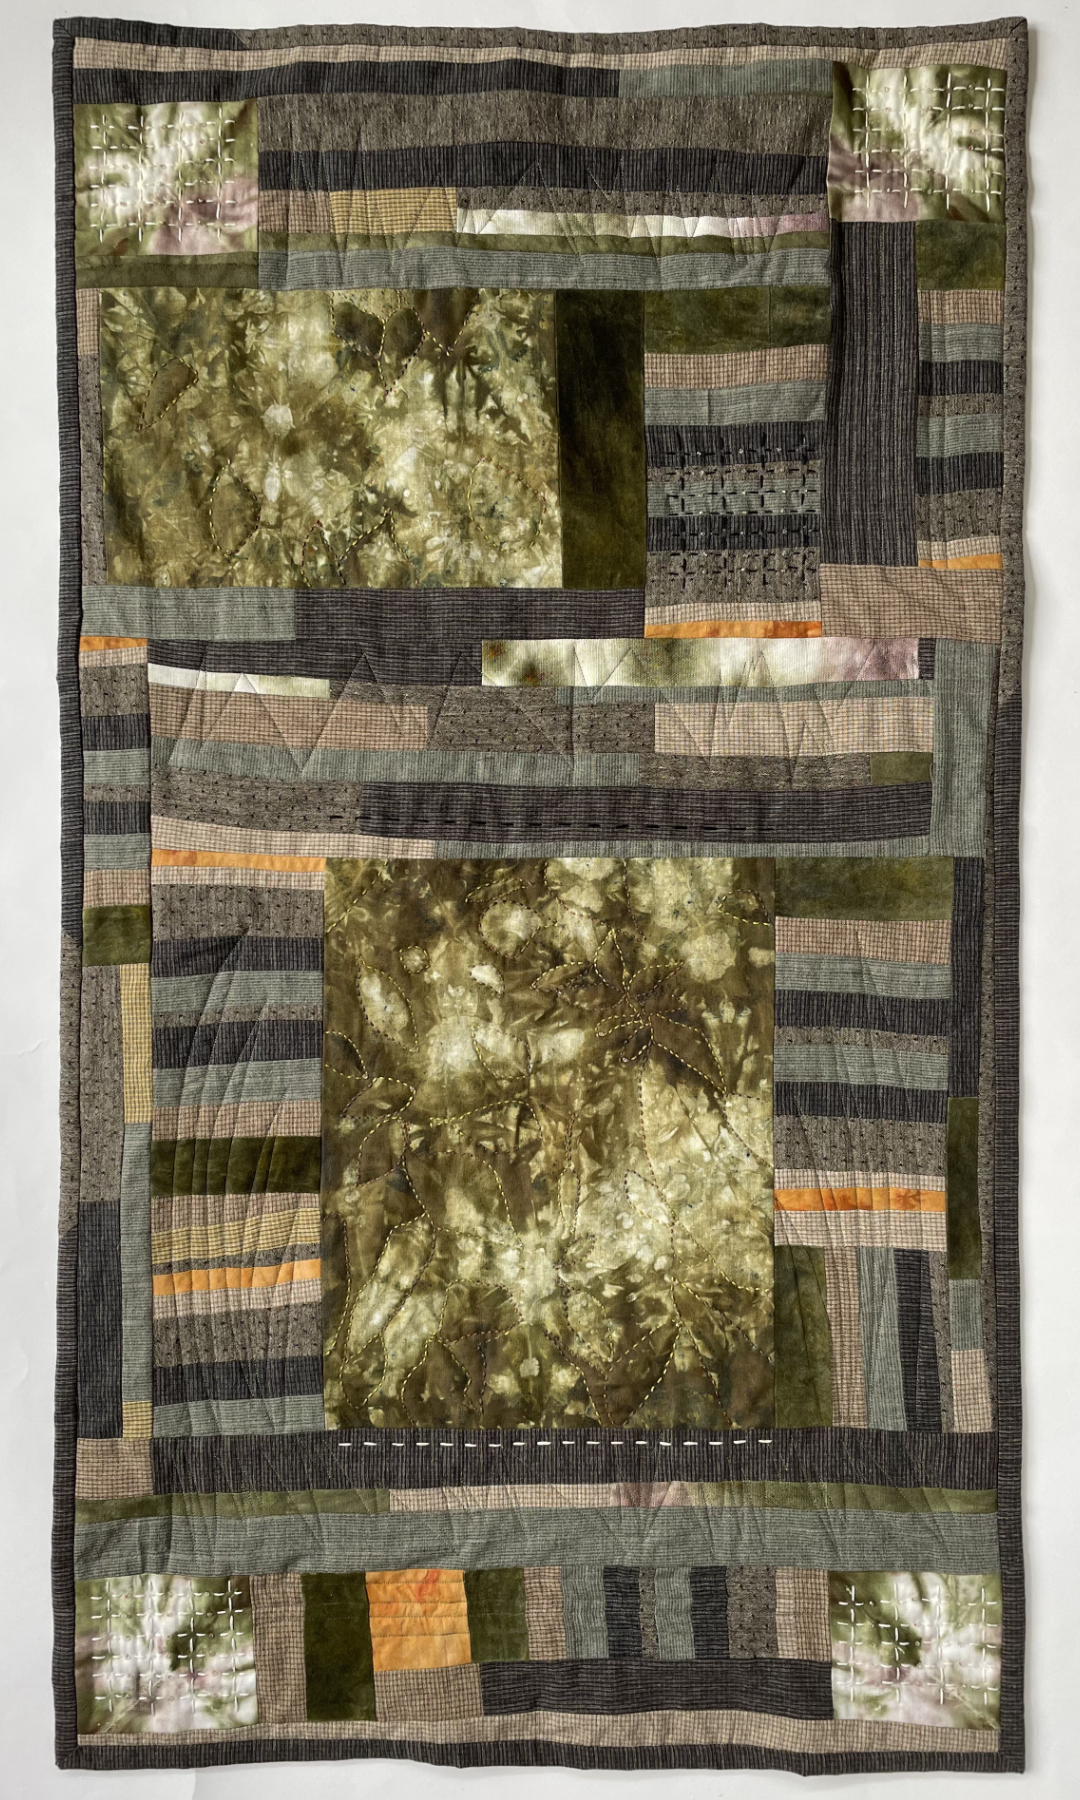 collagelike quilt with abstract pieces and leaflike shapes